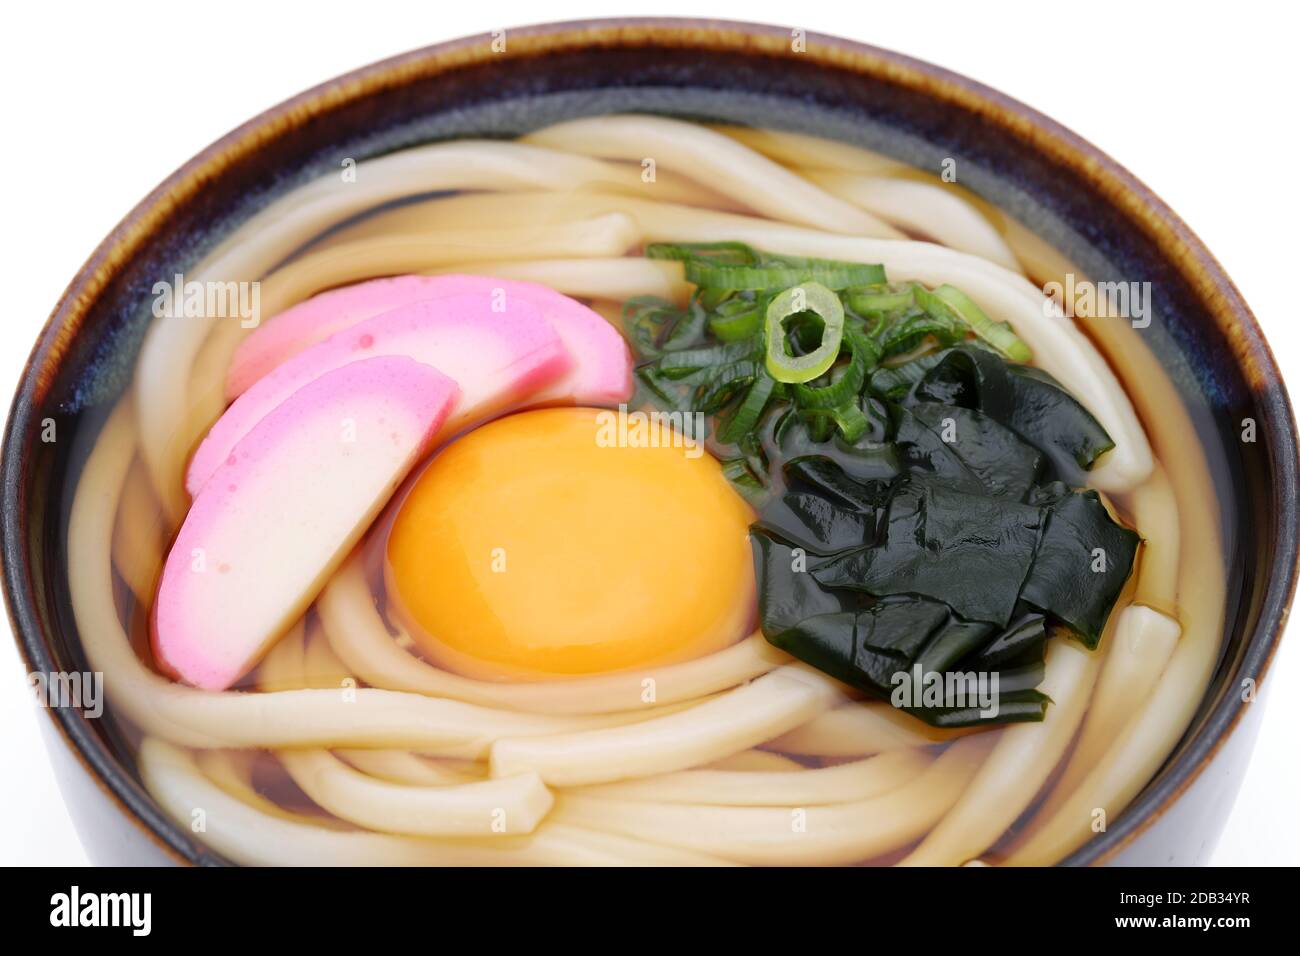 Japanese noodles in a ceramic bowl on white background Stock Photo